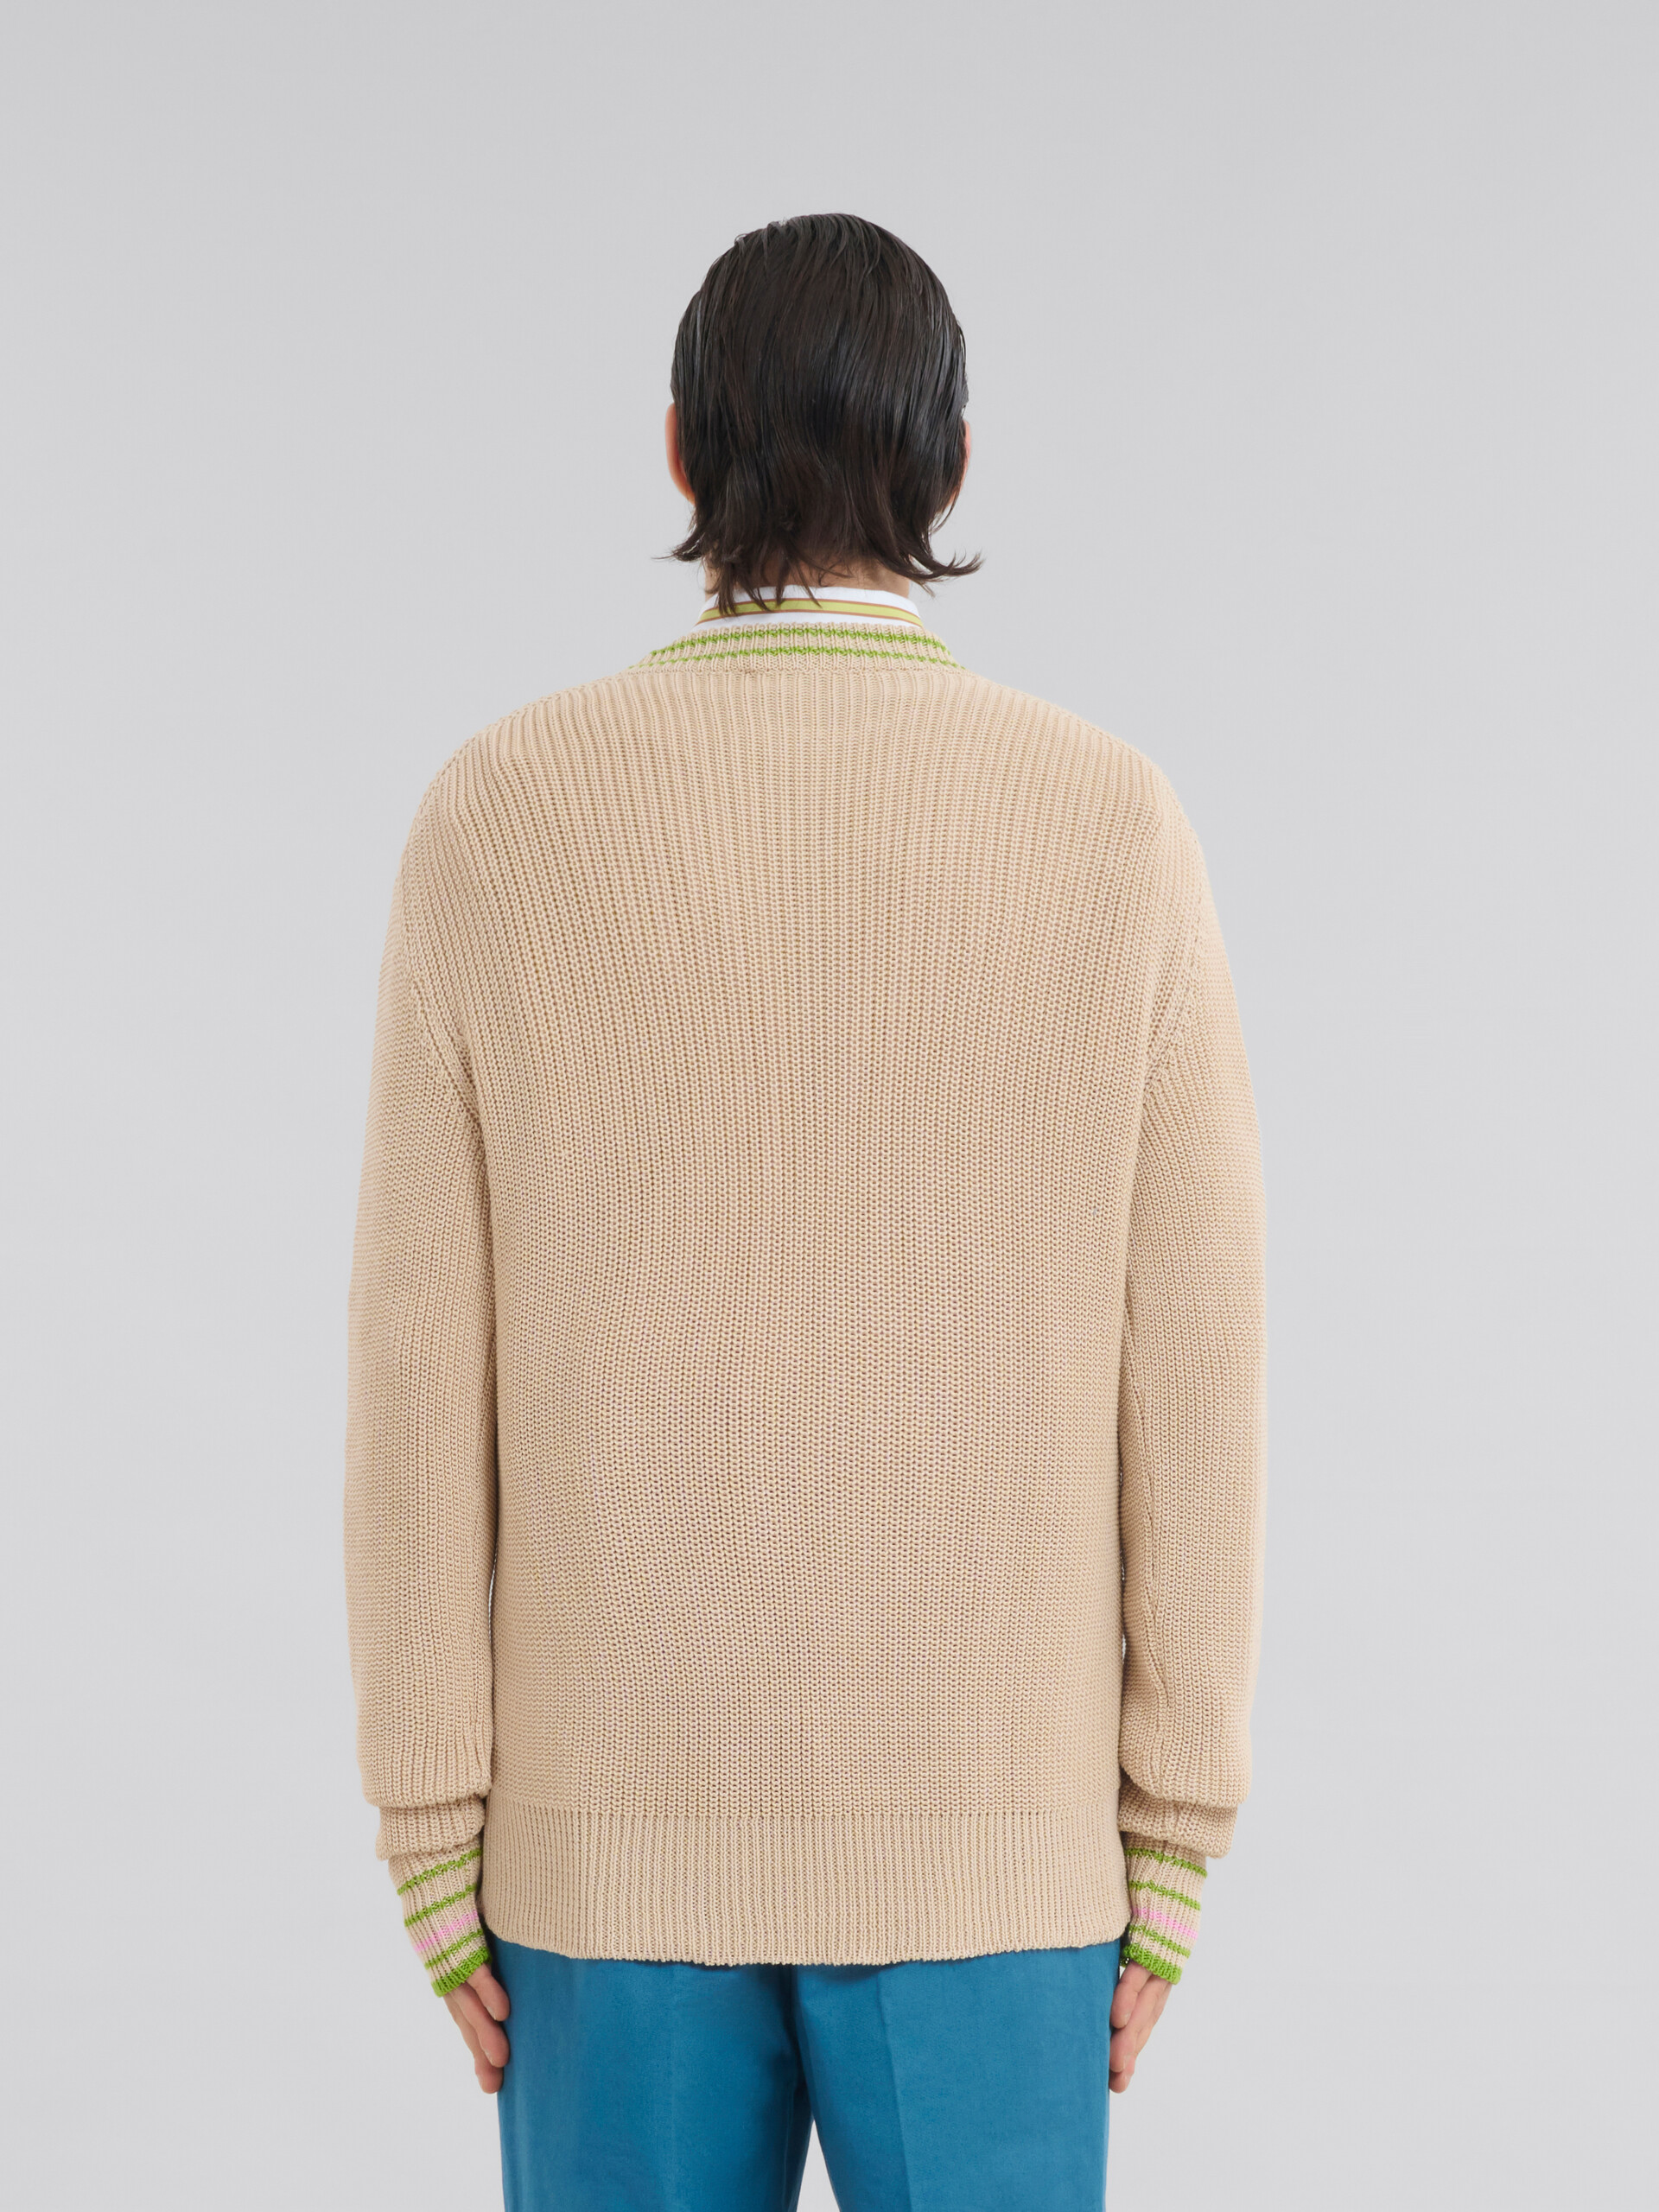 Blue cotton jumper with Marni patches - Pullovers - Image 3